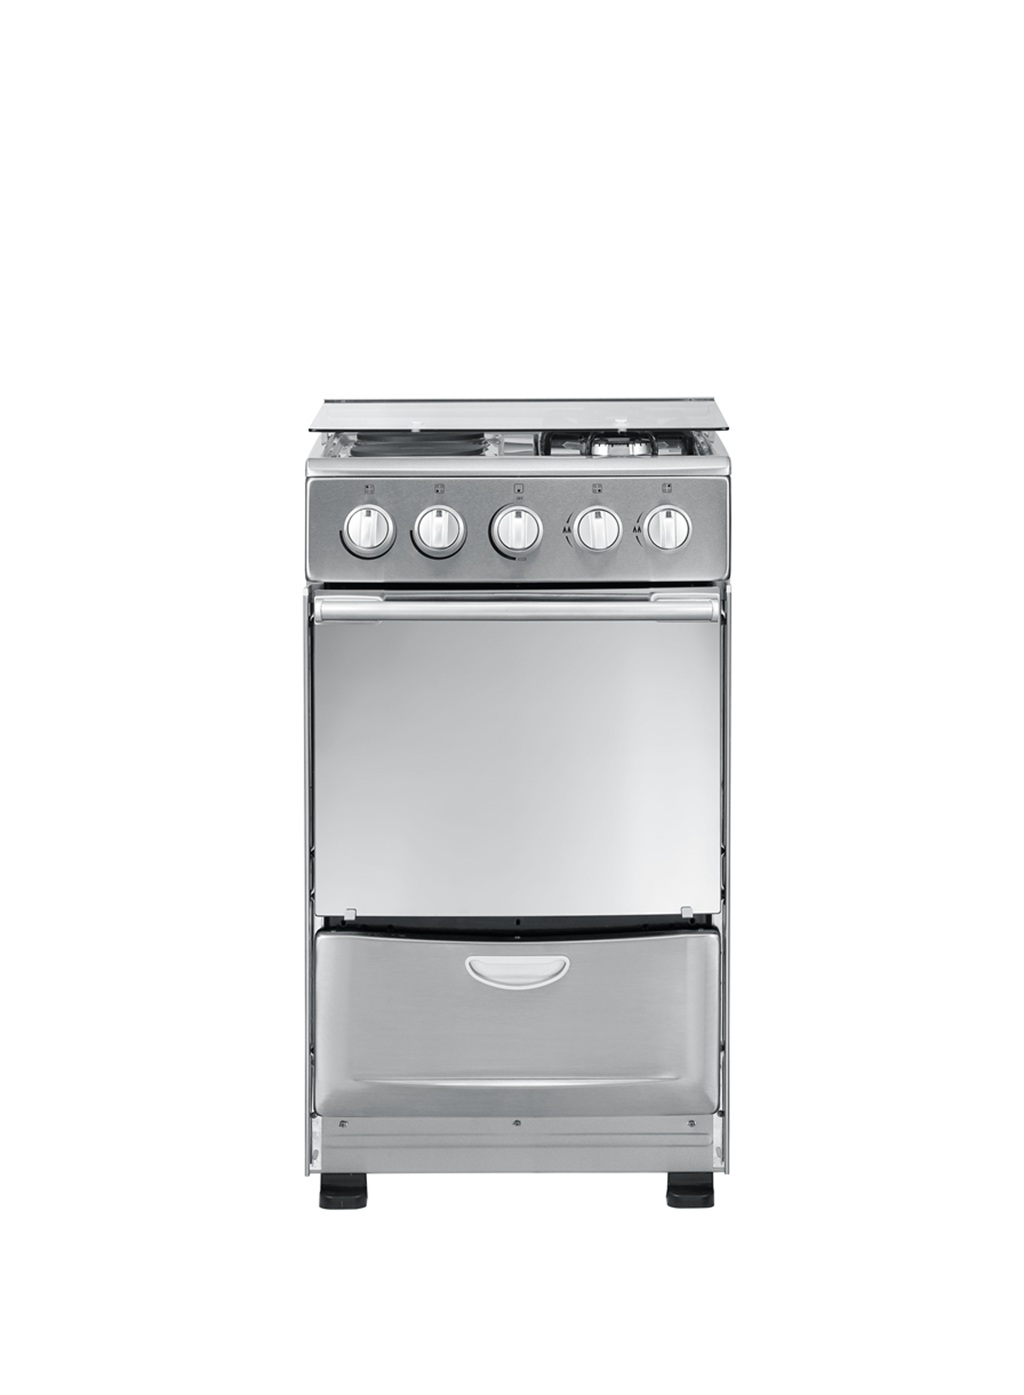 20 Inches Wide 4 Burners Freestanding Electric Stove and Oven